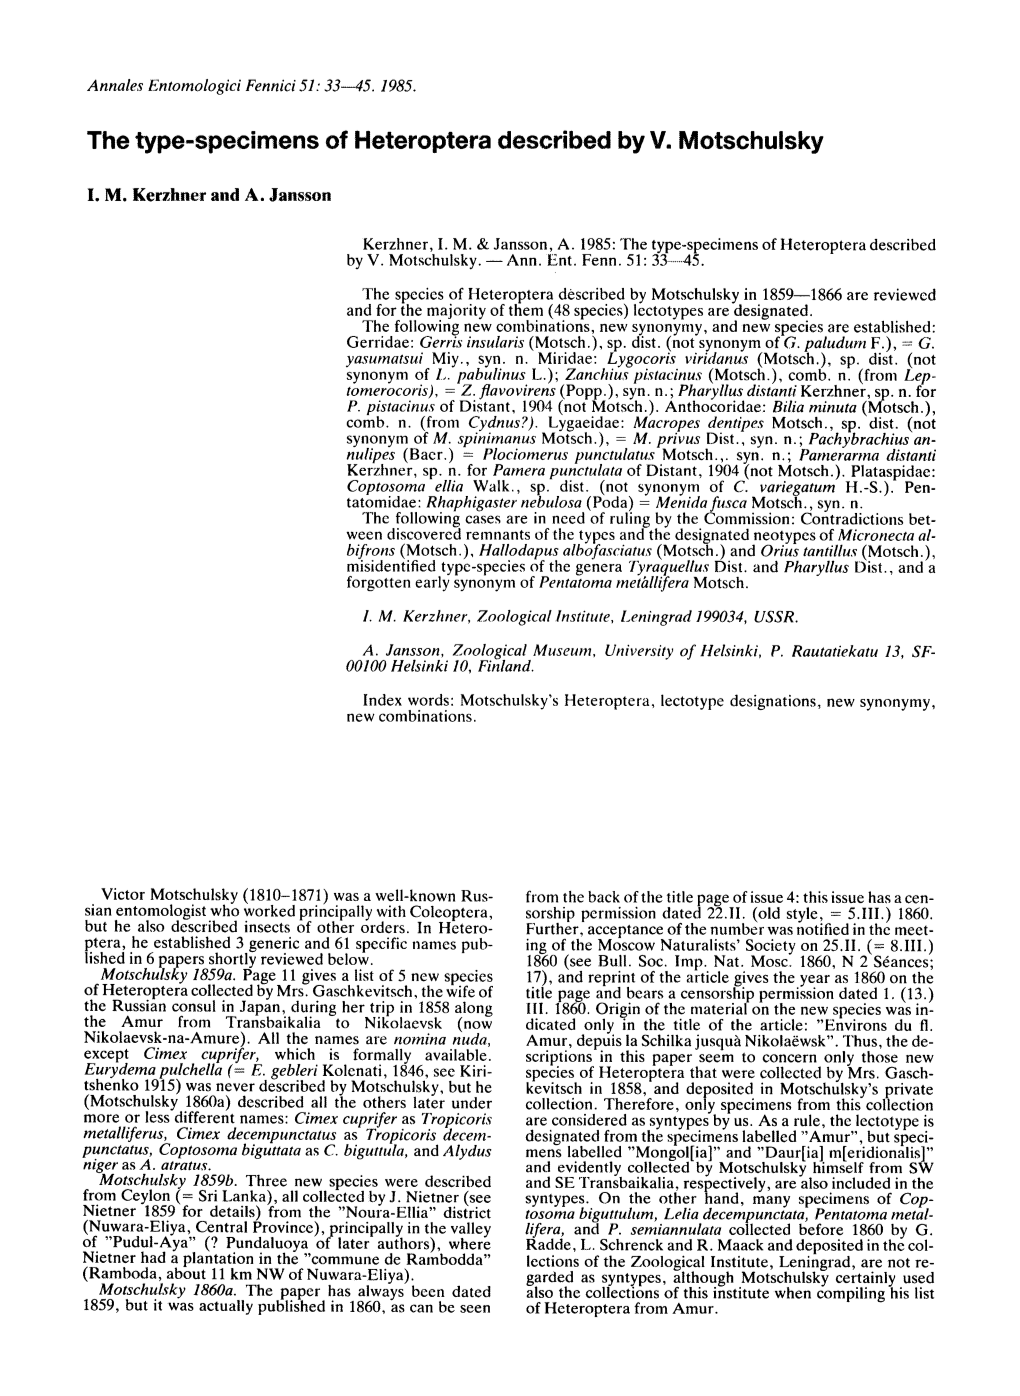 The Type-Specimens of Heteroptera Described by V. Motschulsky